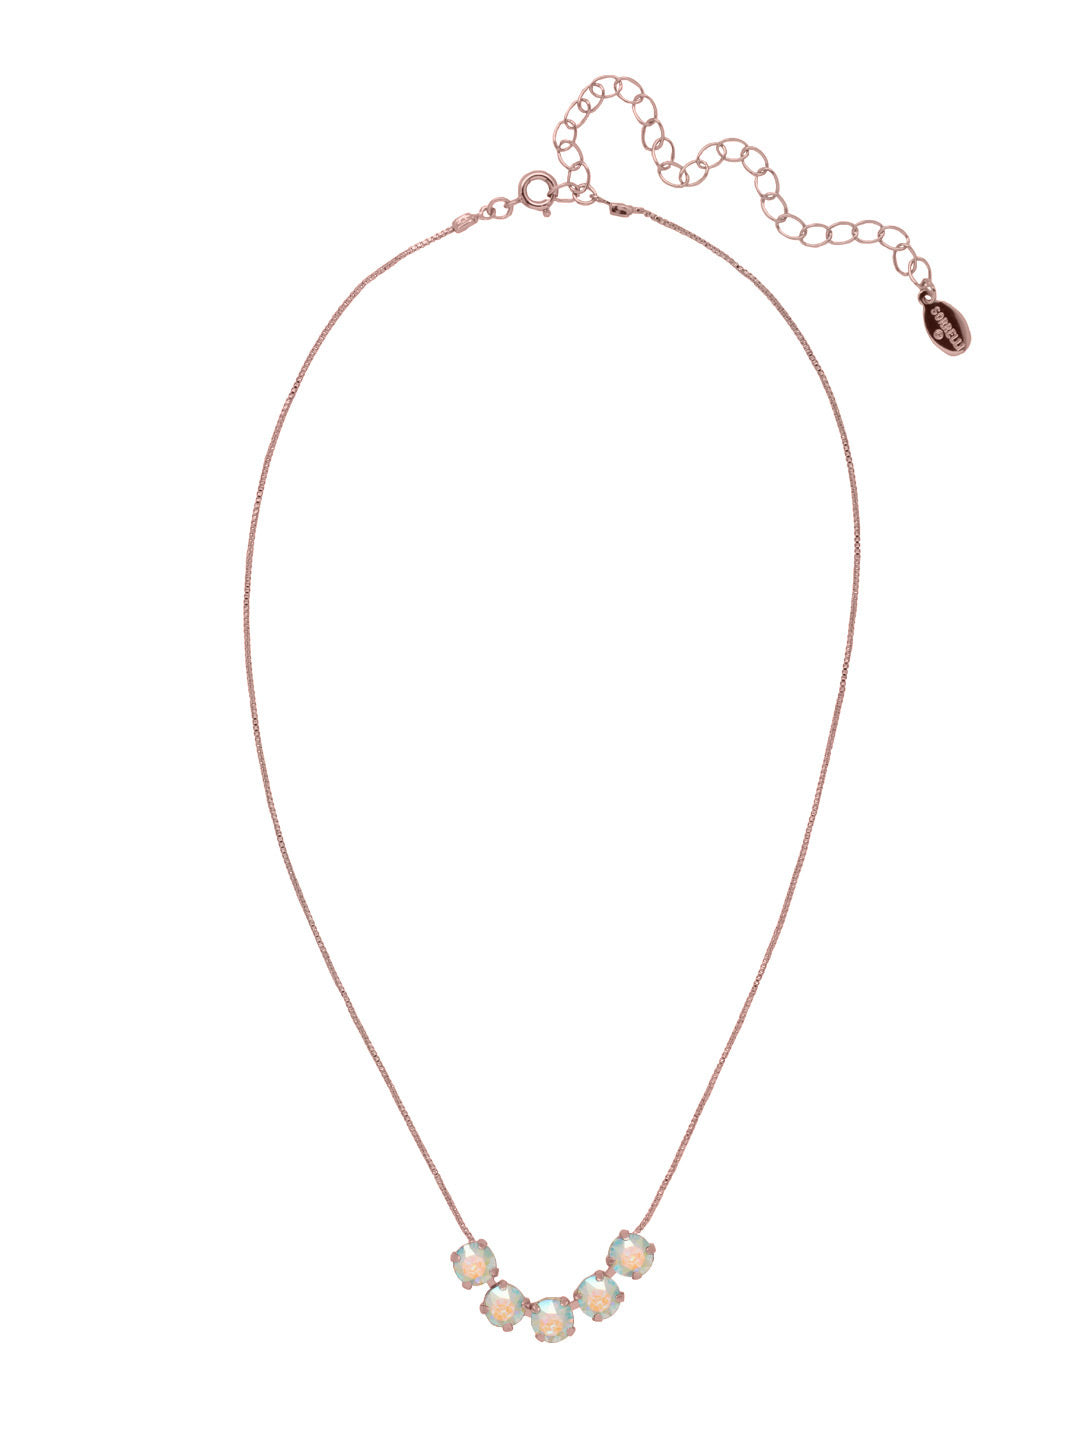 Shaughna Tennis Necklace - NFC84RGCAB - <p>The Shaughna Tennis Necklace features five crystals on a delicate adjustable chain. From Sorrelli's Crystal Aurora Borealis collection in our Rose Gold-tone finish.</p>